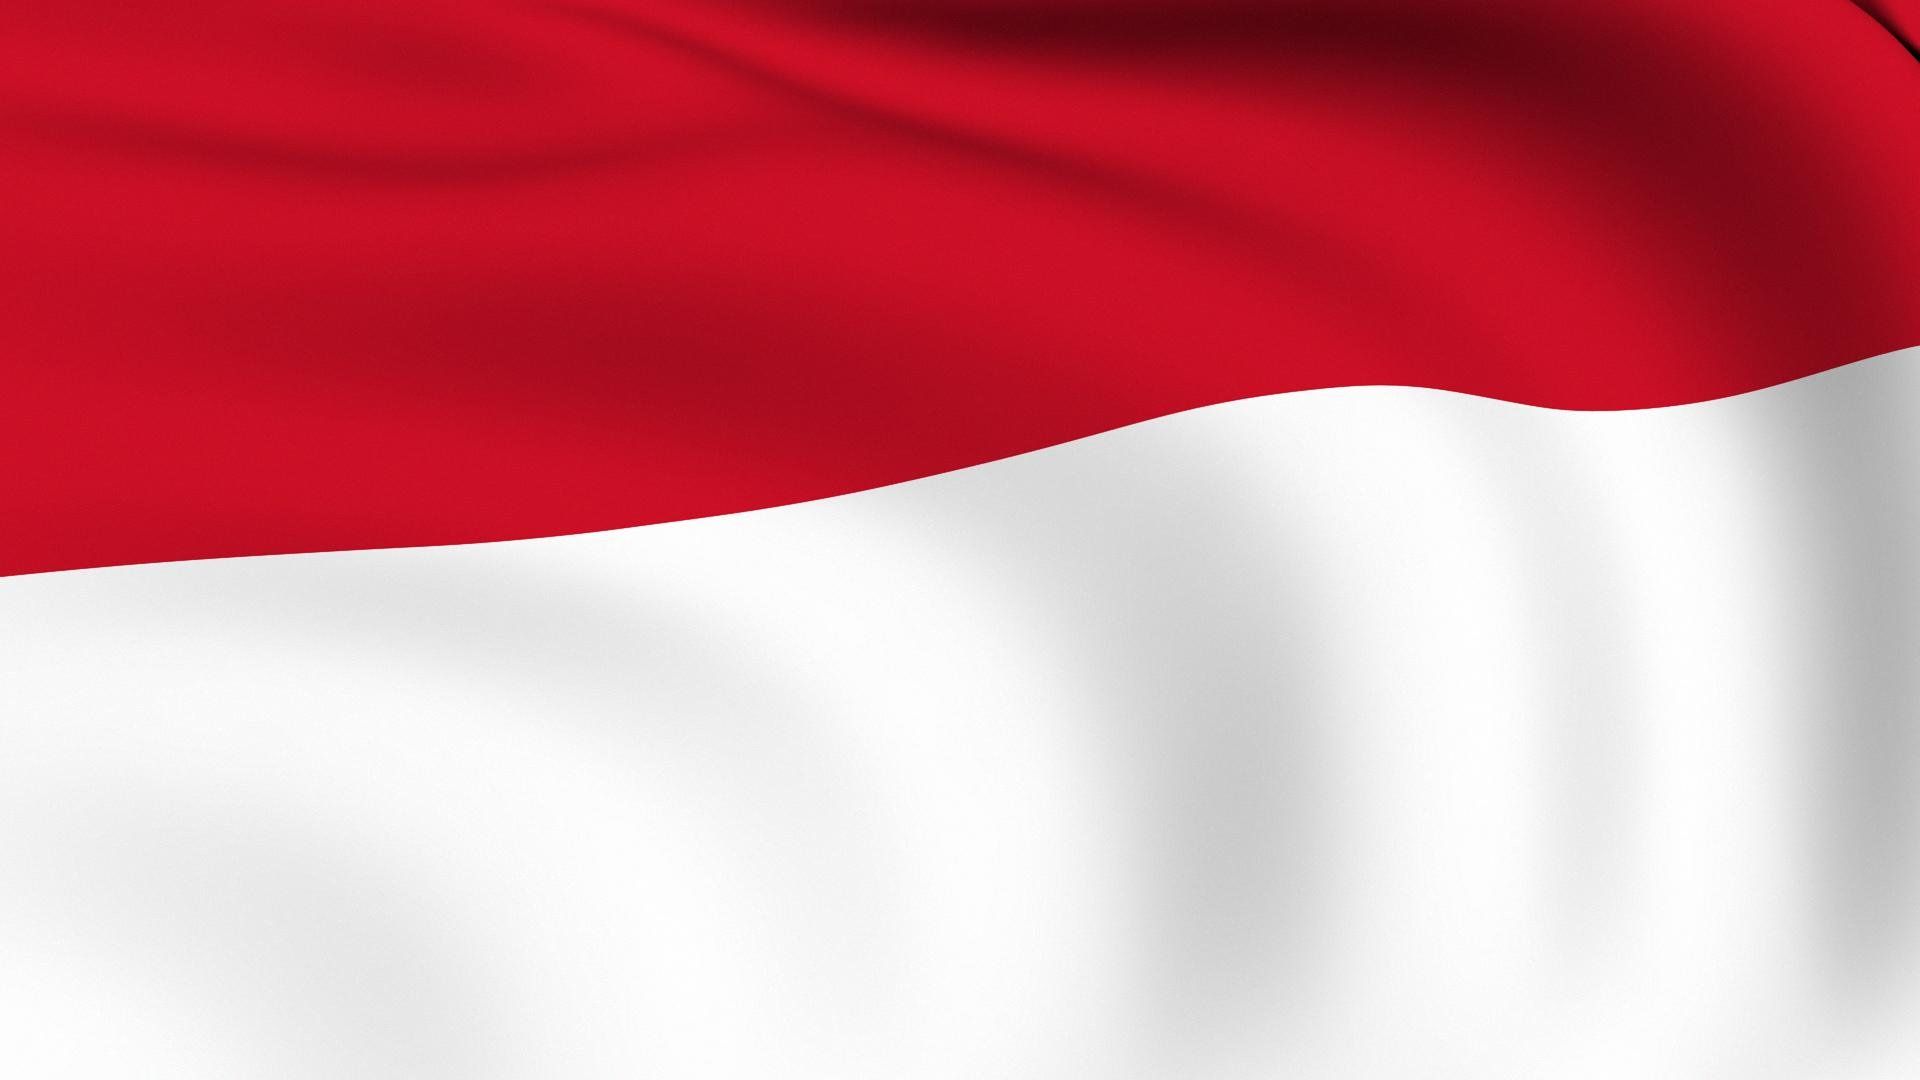 Free Download Indonesian Flag Indonesia Flags Wallpaper 19x1080 19x1080 For Your Desktop Mobile Tablet Explore 35 Indonesia Flag Wallpapers Indonesia Flag Wallpapers Wallpaper Peta Indonesia Flag Background Wallpaper